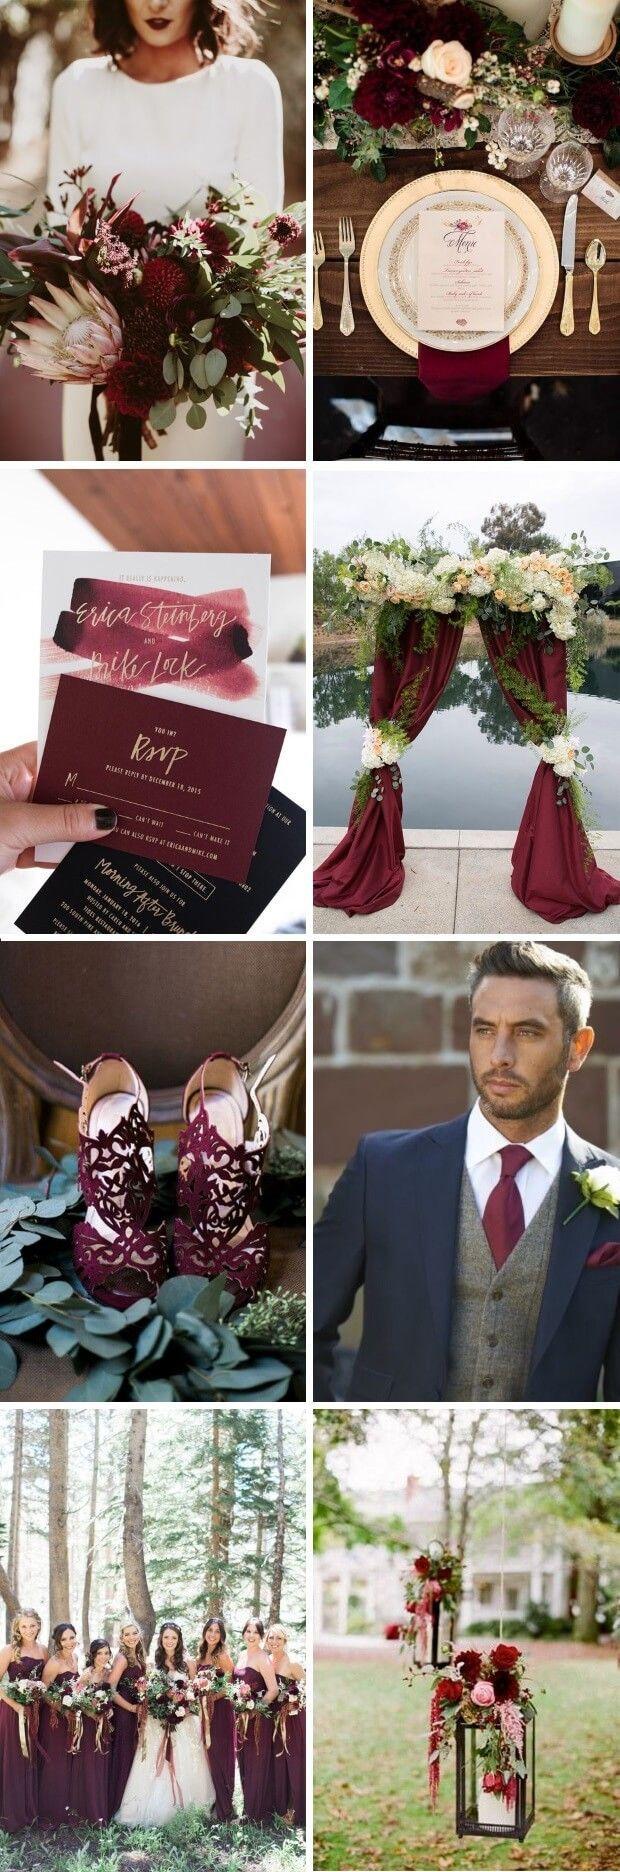 Wedding - A Magical Maroon, Gold & Navy Palette For An Elegant Winter Wedding